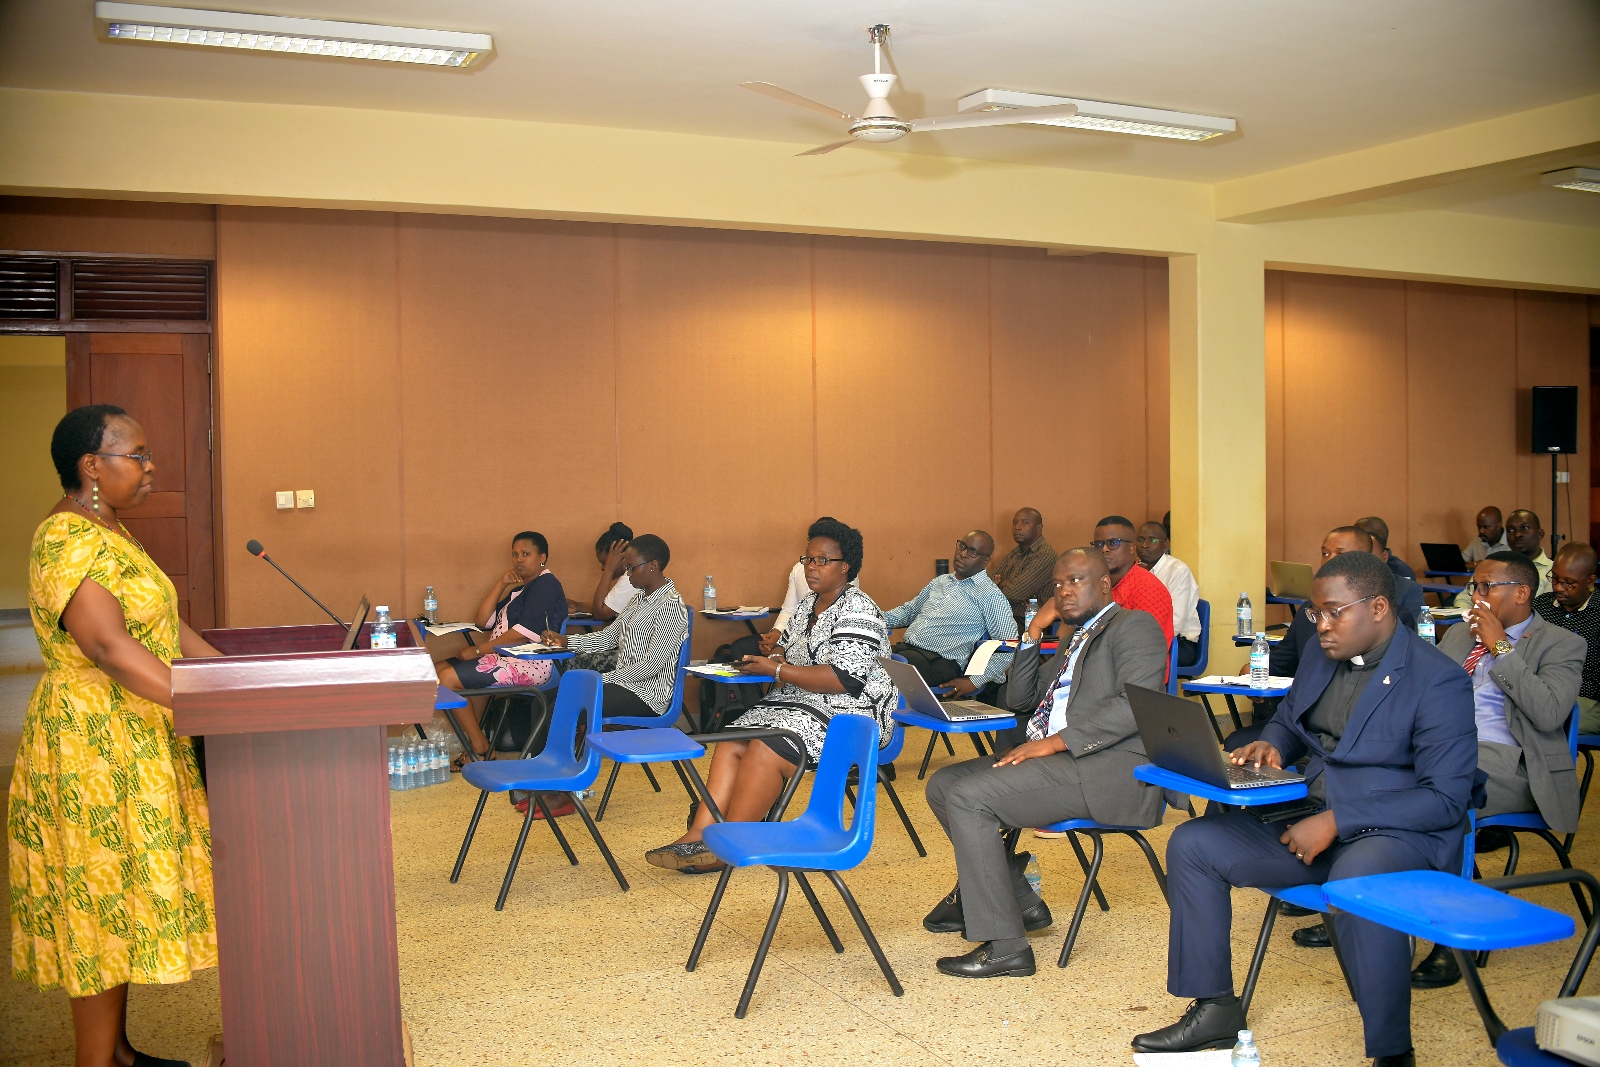 The Director Makerere University Gender Mainstreaming Directorate Dr. Euzobia Mugisha Baine (left) addresses participants at the Male Round Table discussion for Senior Academic and Administrative Male staff on 6th June 2024. Frank Kalimuzo Central Teaching Facility, Makerere University, Kampala Uganda, East Africa.